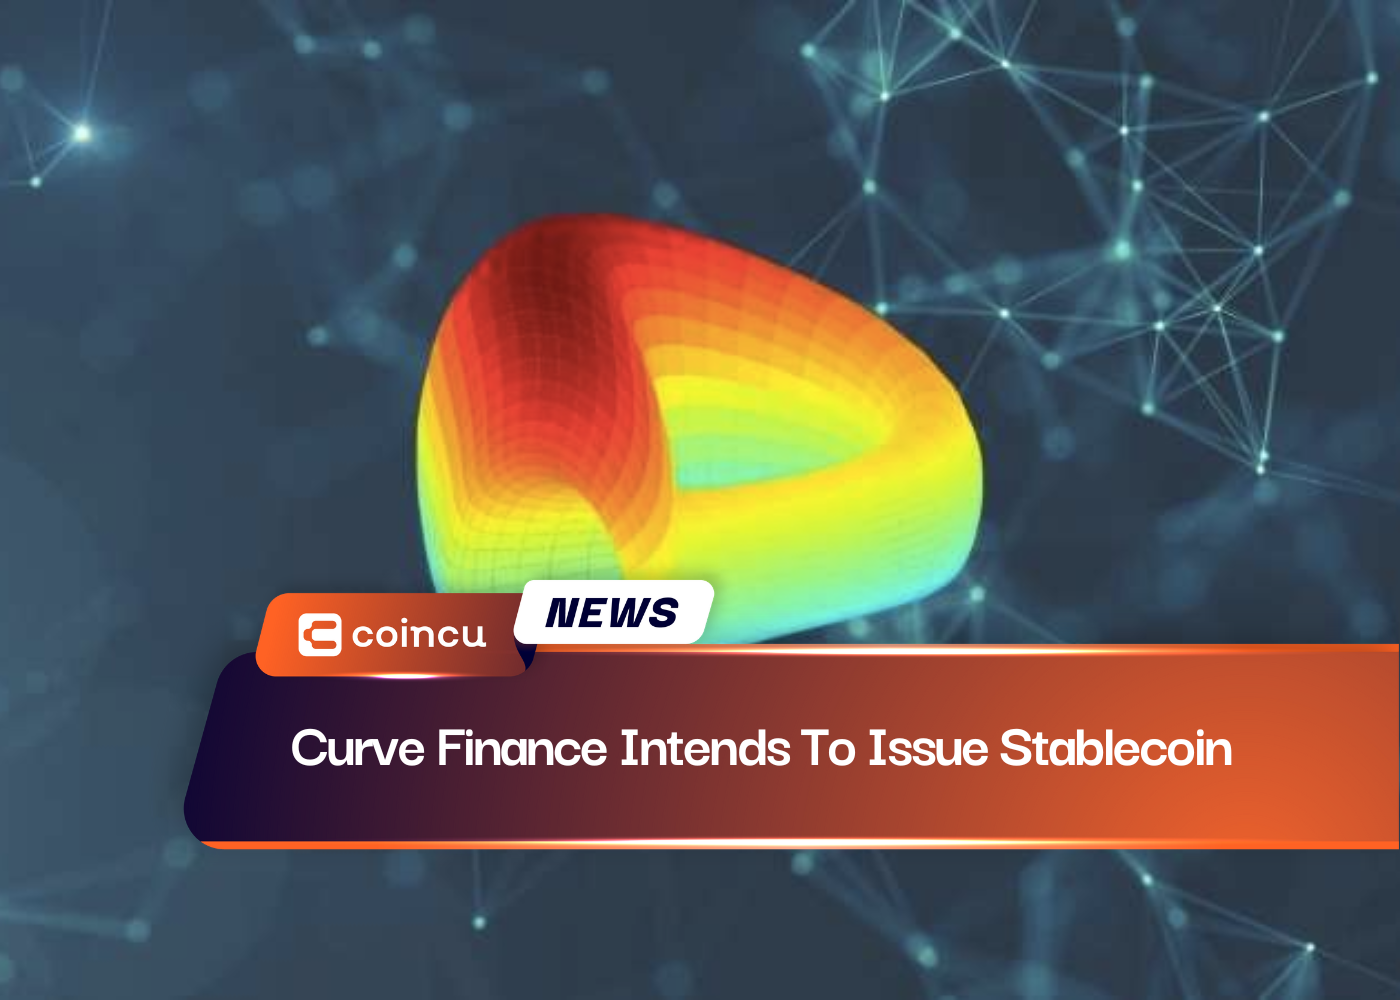 Curve Finance Intends To Issue Stablecoin